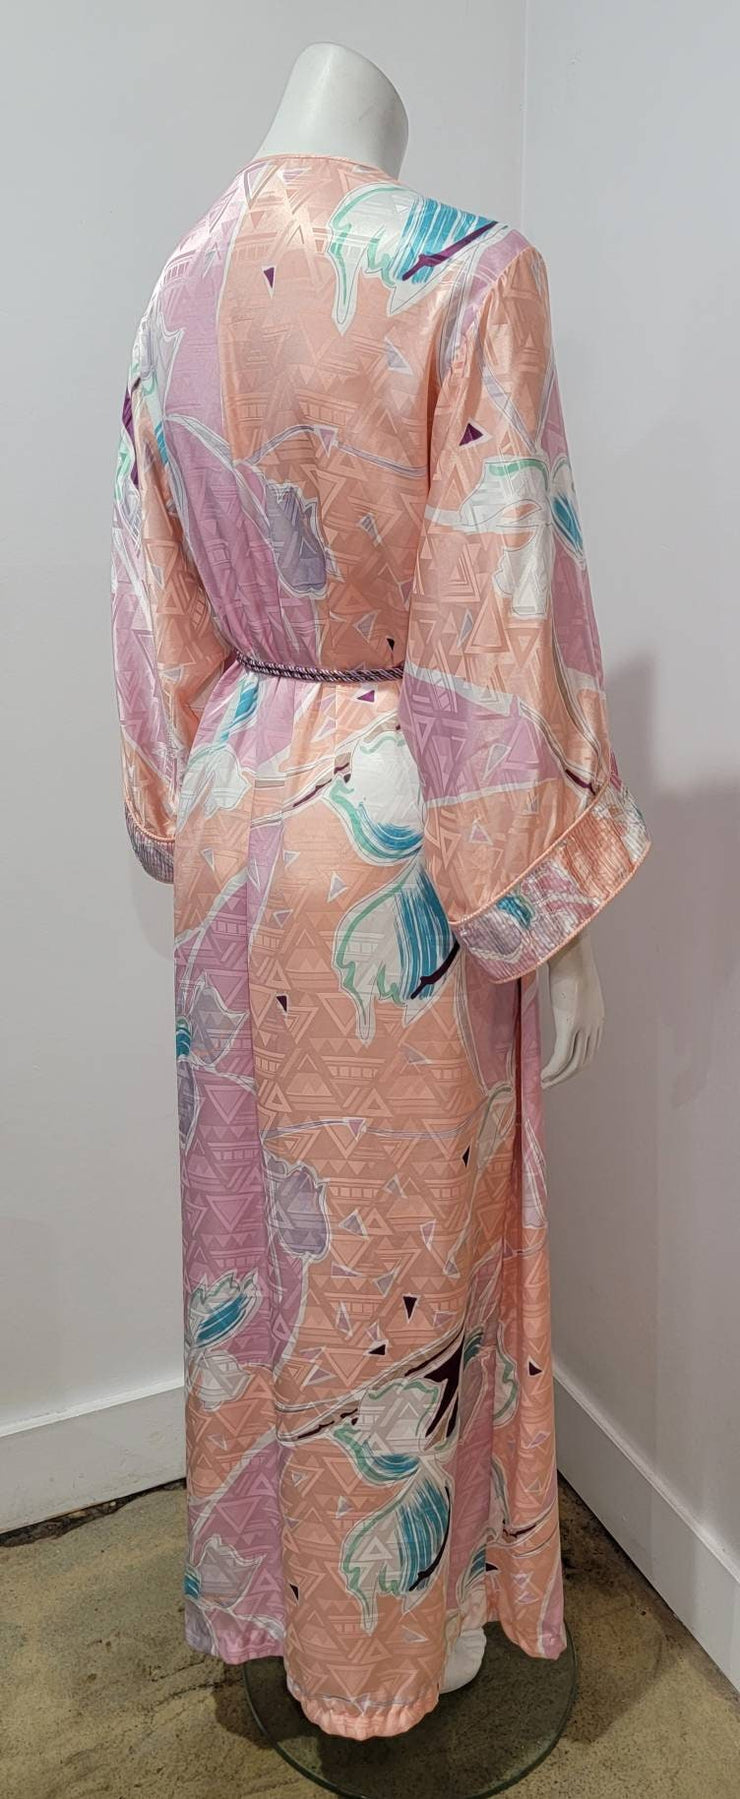 Vintage 00s Deco Abstract Floral Jacquard Rope Duster Robe by Mary McFadden